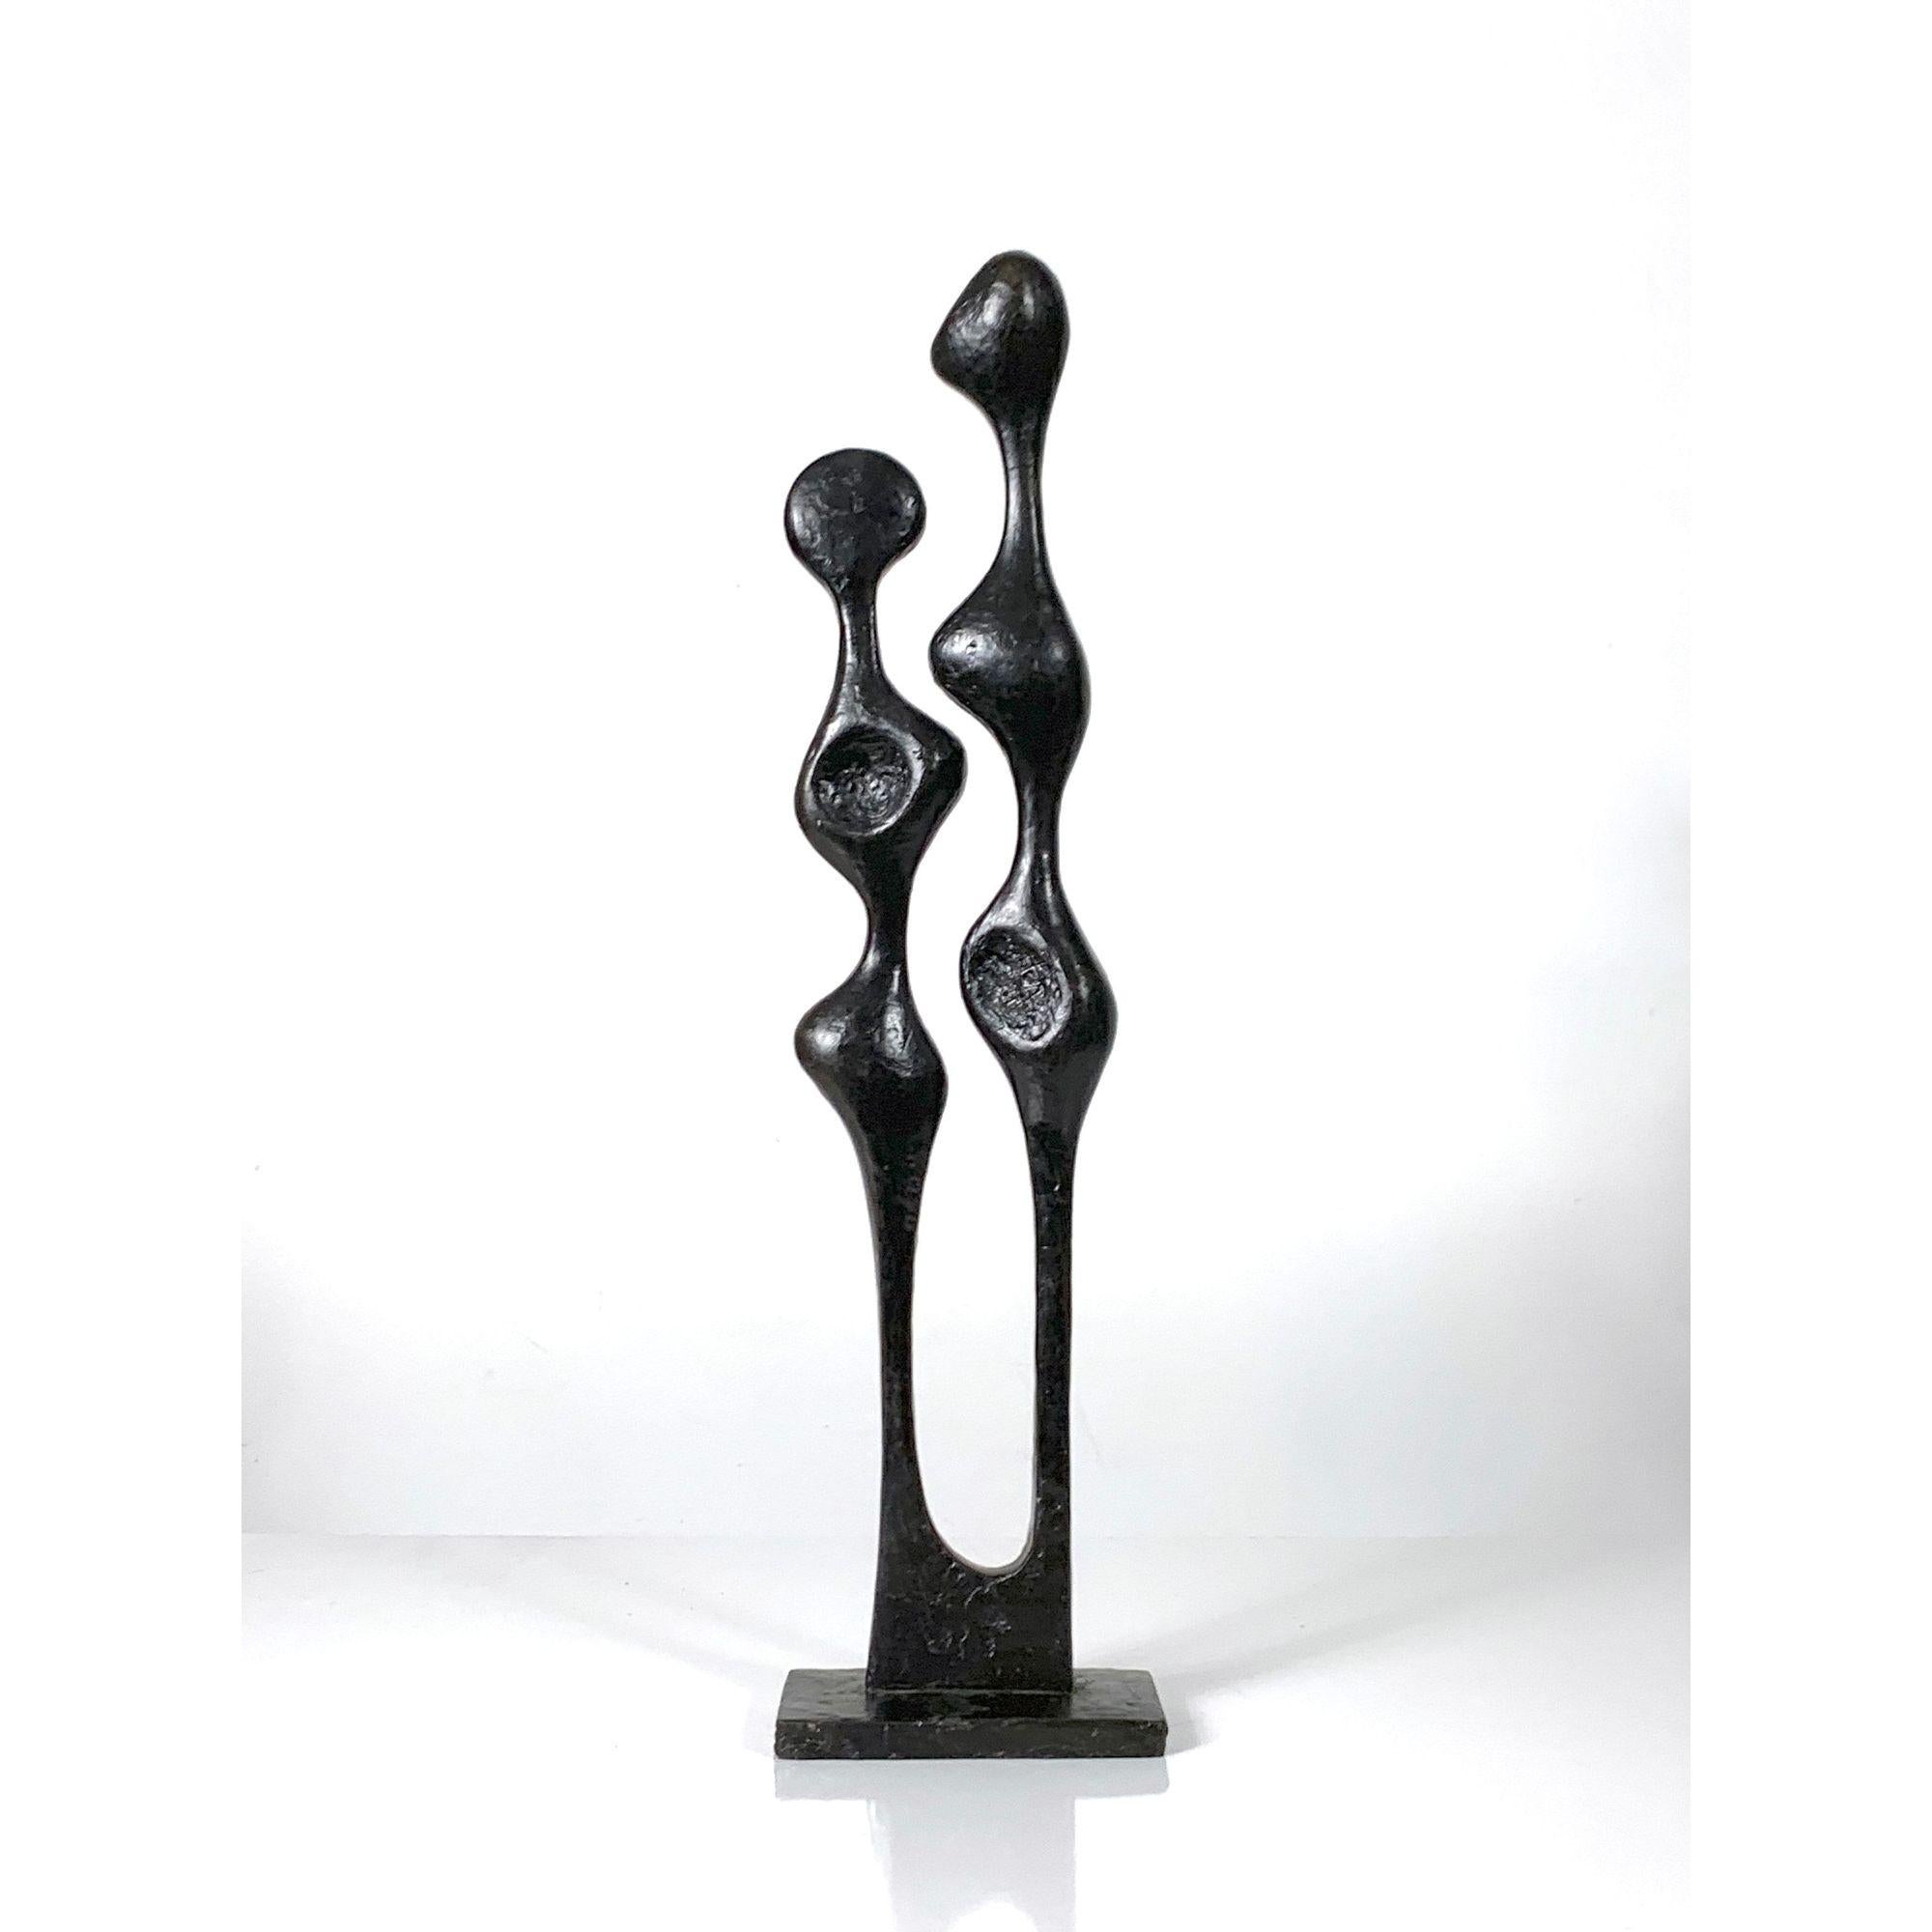 Tall Bronze Abstract Figurative Sculpture 

Modernist sculpture circa 1970s
Executed in solid bronze with abstract figurative form
Unsigned

Additional Information:
Materials: Bronze
Dimensions: 2.75